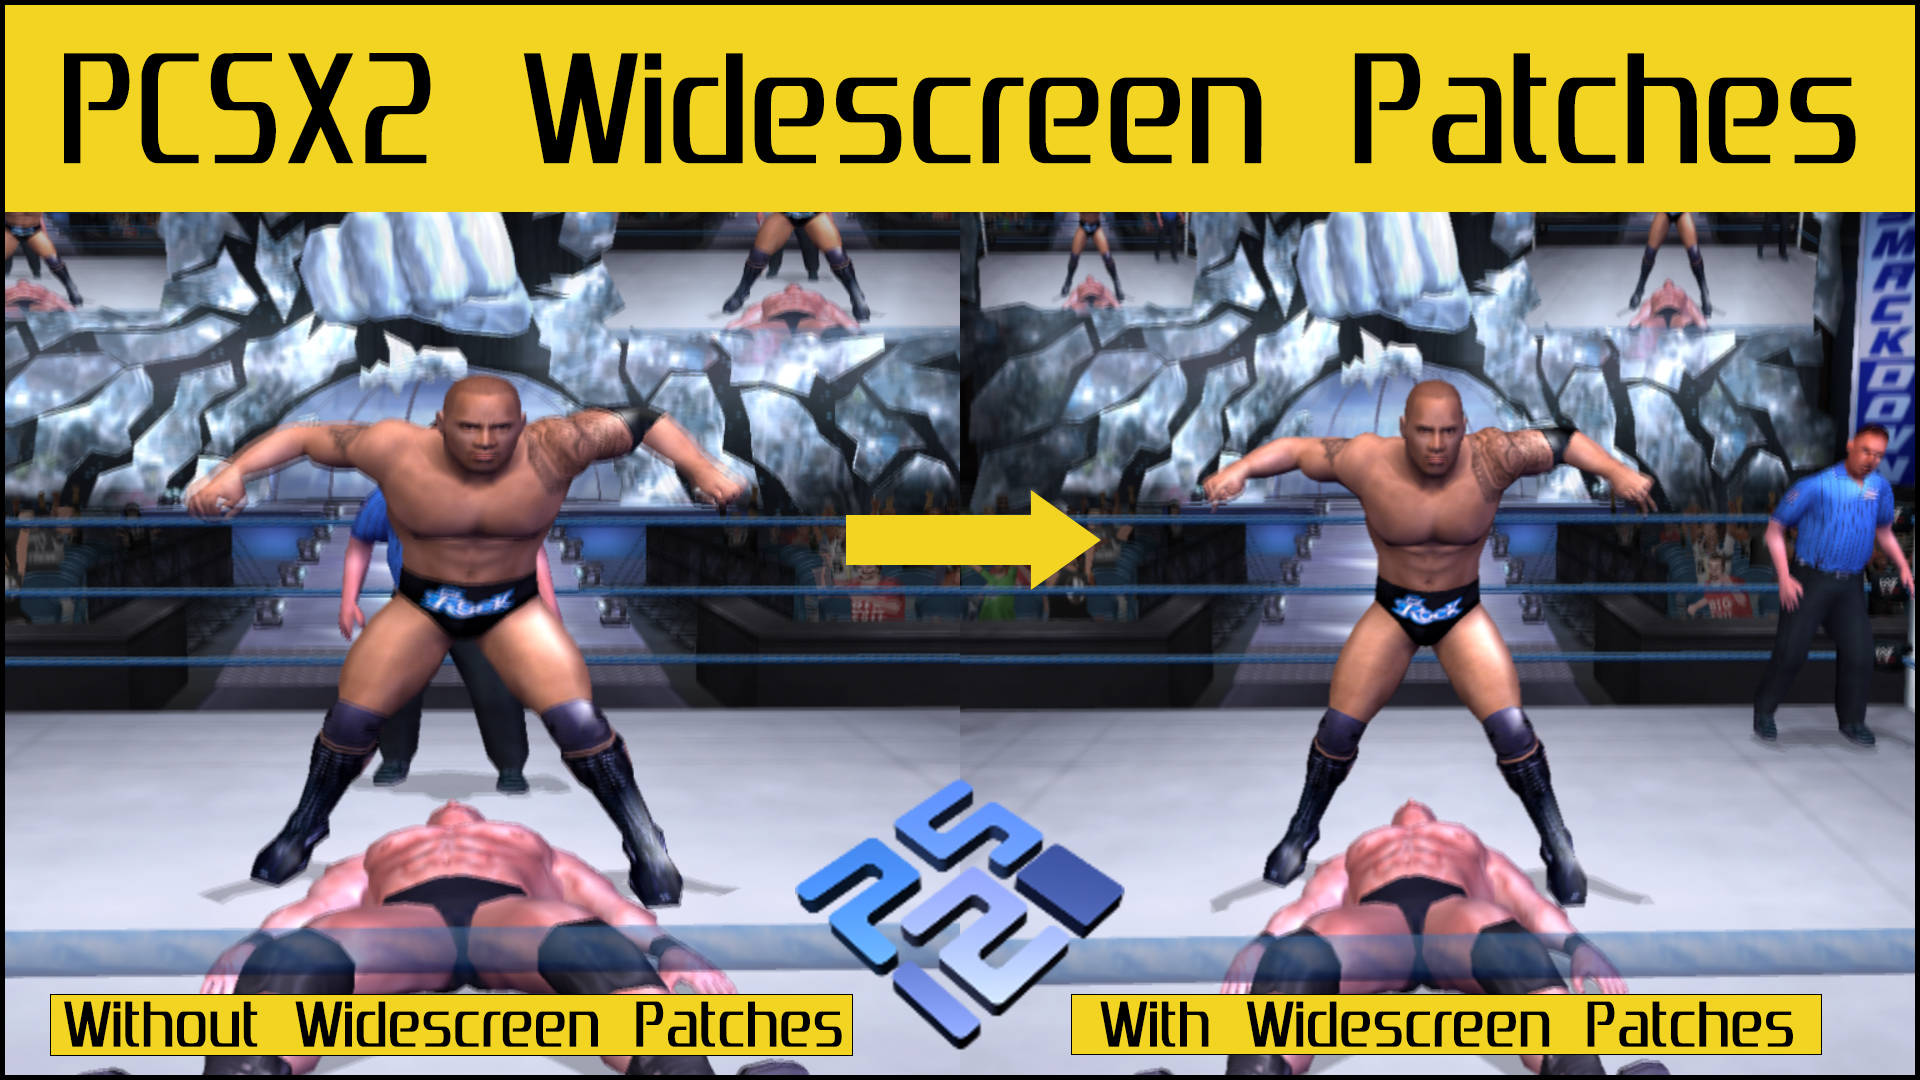 PCSX2 Widescreen Patches How To Make PCSX2 Widescreen Using Patches